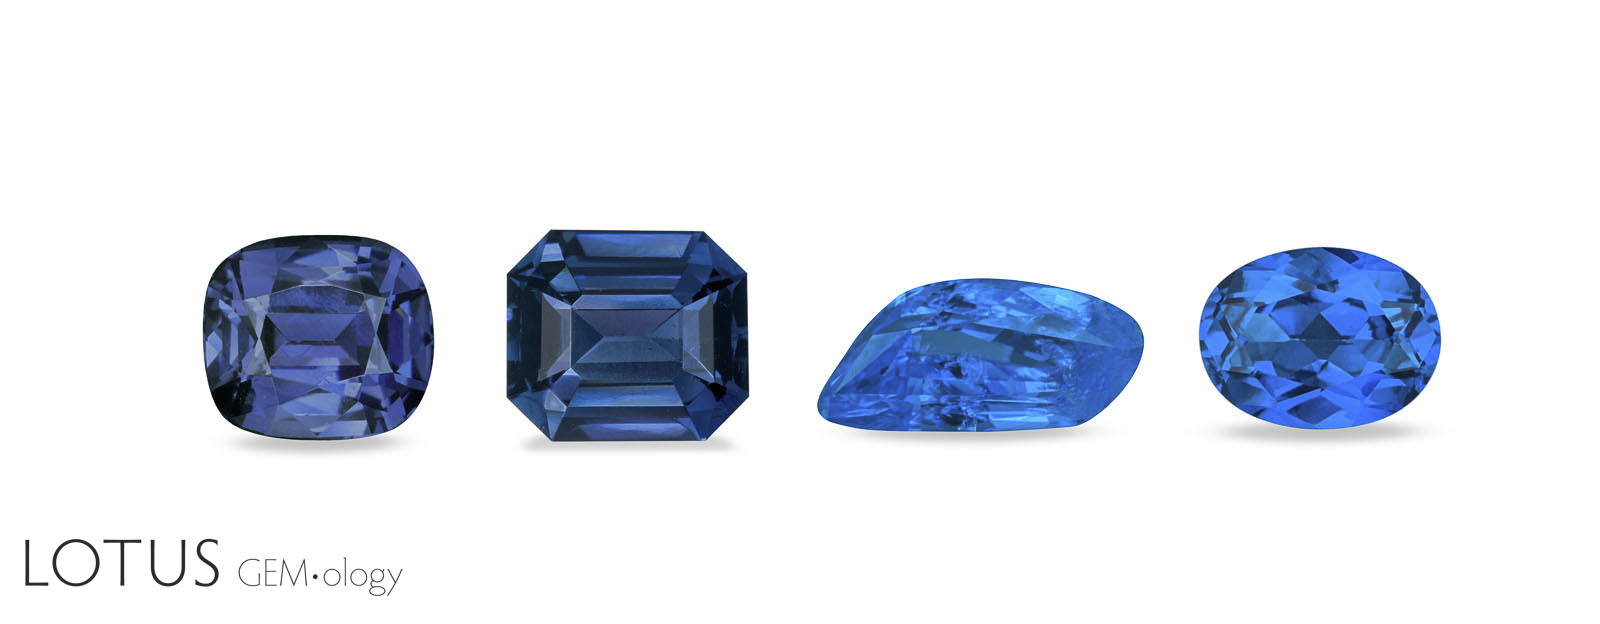 Four blue spinels, three natural and one synthetic (far right). All contain measurable cobalt using ICP-MS, but cobalt could not be detected in the two stones at left using XRF. If labs and the trade decide that the term “cobalt blue” spinel should apply to all spinels that contain traces of cobalt, then a measurement technique must also be specified. Or should the labs and trade decide that only those that visually resemble the synthetic cobalt-blue spinel at right should qualify? Current information suggests that as few as ten parts per million (atomic) of cobalt might influence color (Ippolito et al., 2015). Determining the exact cobalt level is beyond the detection limits of instruments in all but a few gem labs around the world. Do we really need advanced chemical analysis on something that is at its foundation based on visual perception? Or should gemology focus on visual perception?